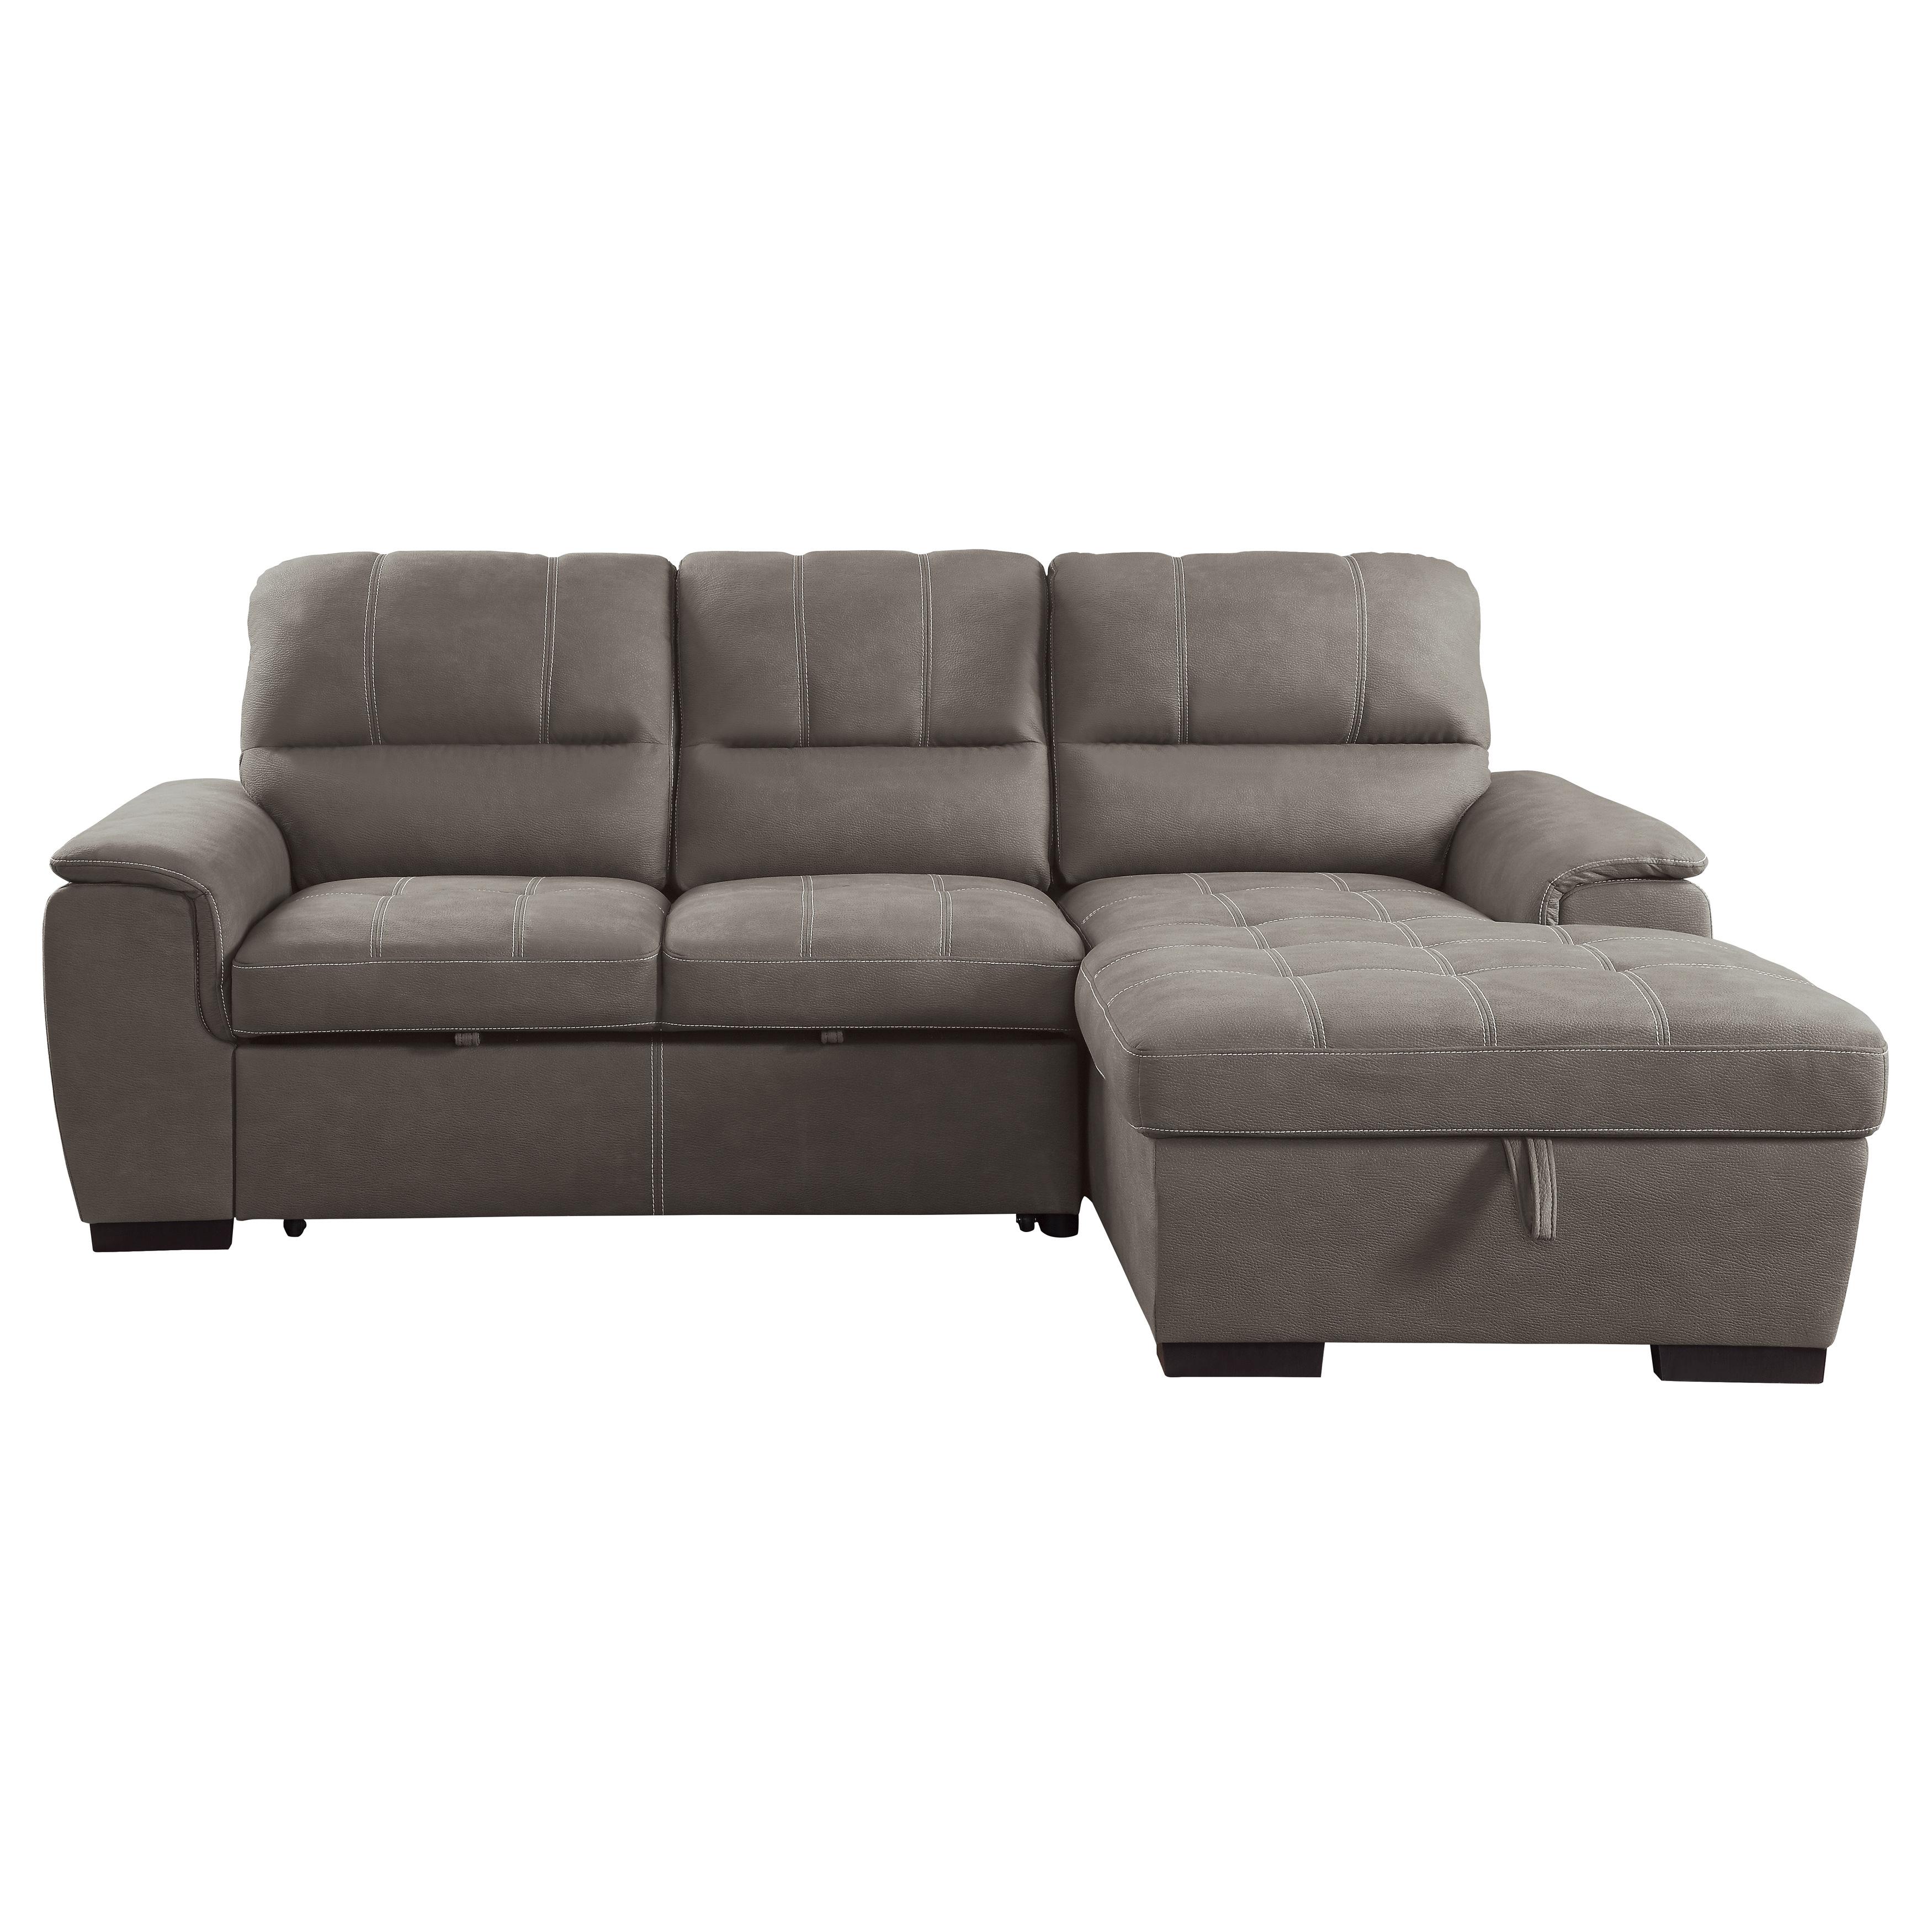 Transitional Sectional 9858TP*SC Andes 9858TP*SC in Taupe Microfiber